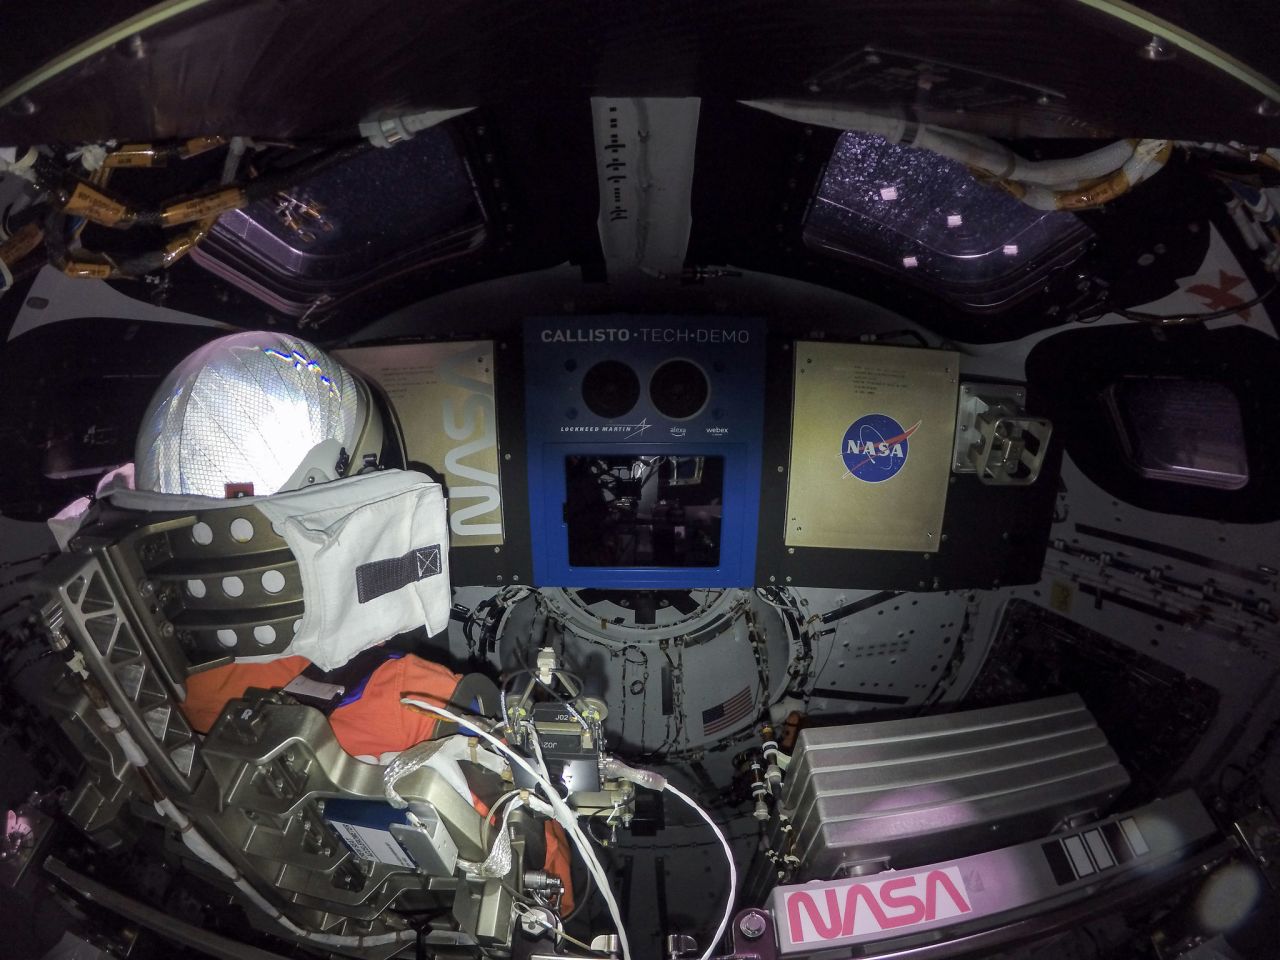 The inside of the Orion crew module is seen on day one in space. At left is Commander Moonikin Campos, a mannequin equipped with sensors to collect data that will help scientists and engineers understand the deep-space environment for future missions.